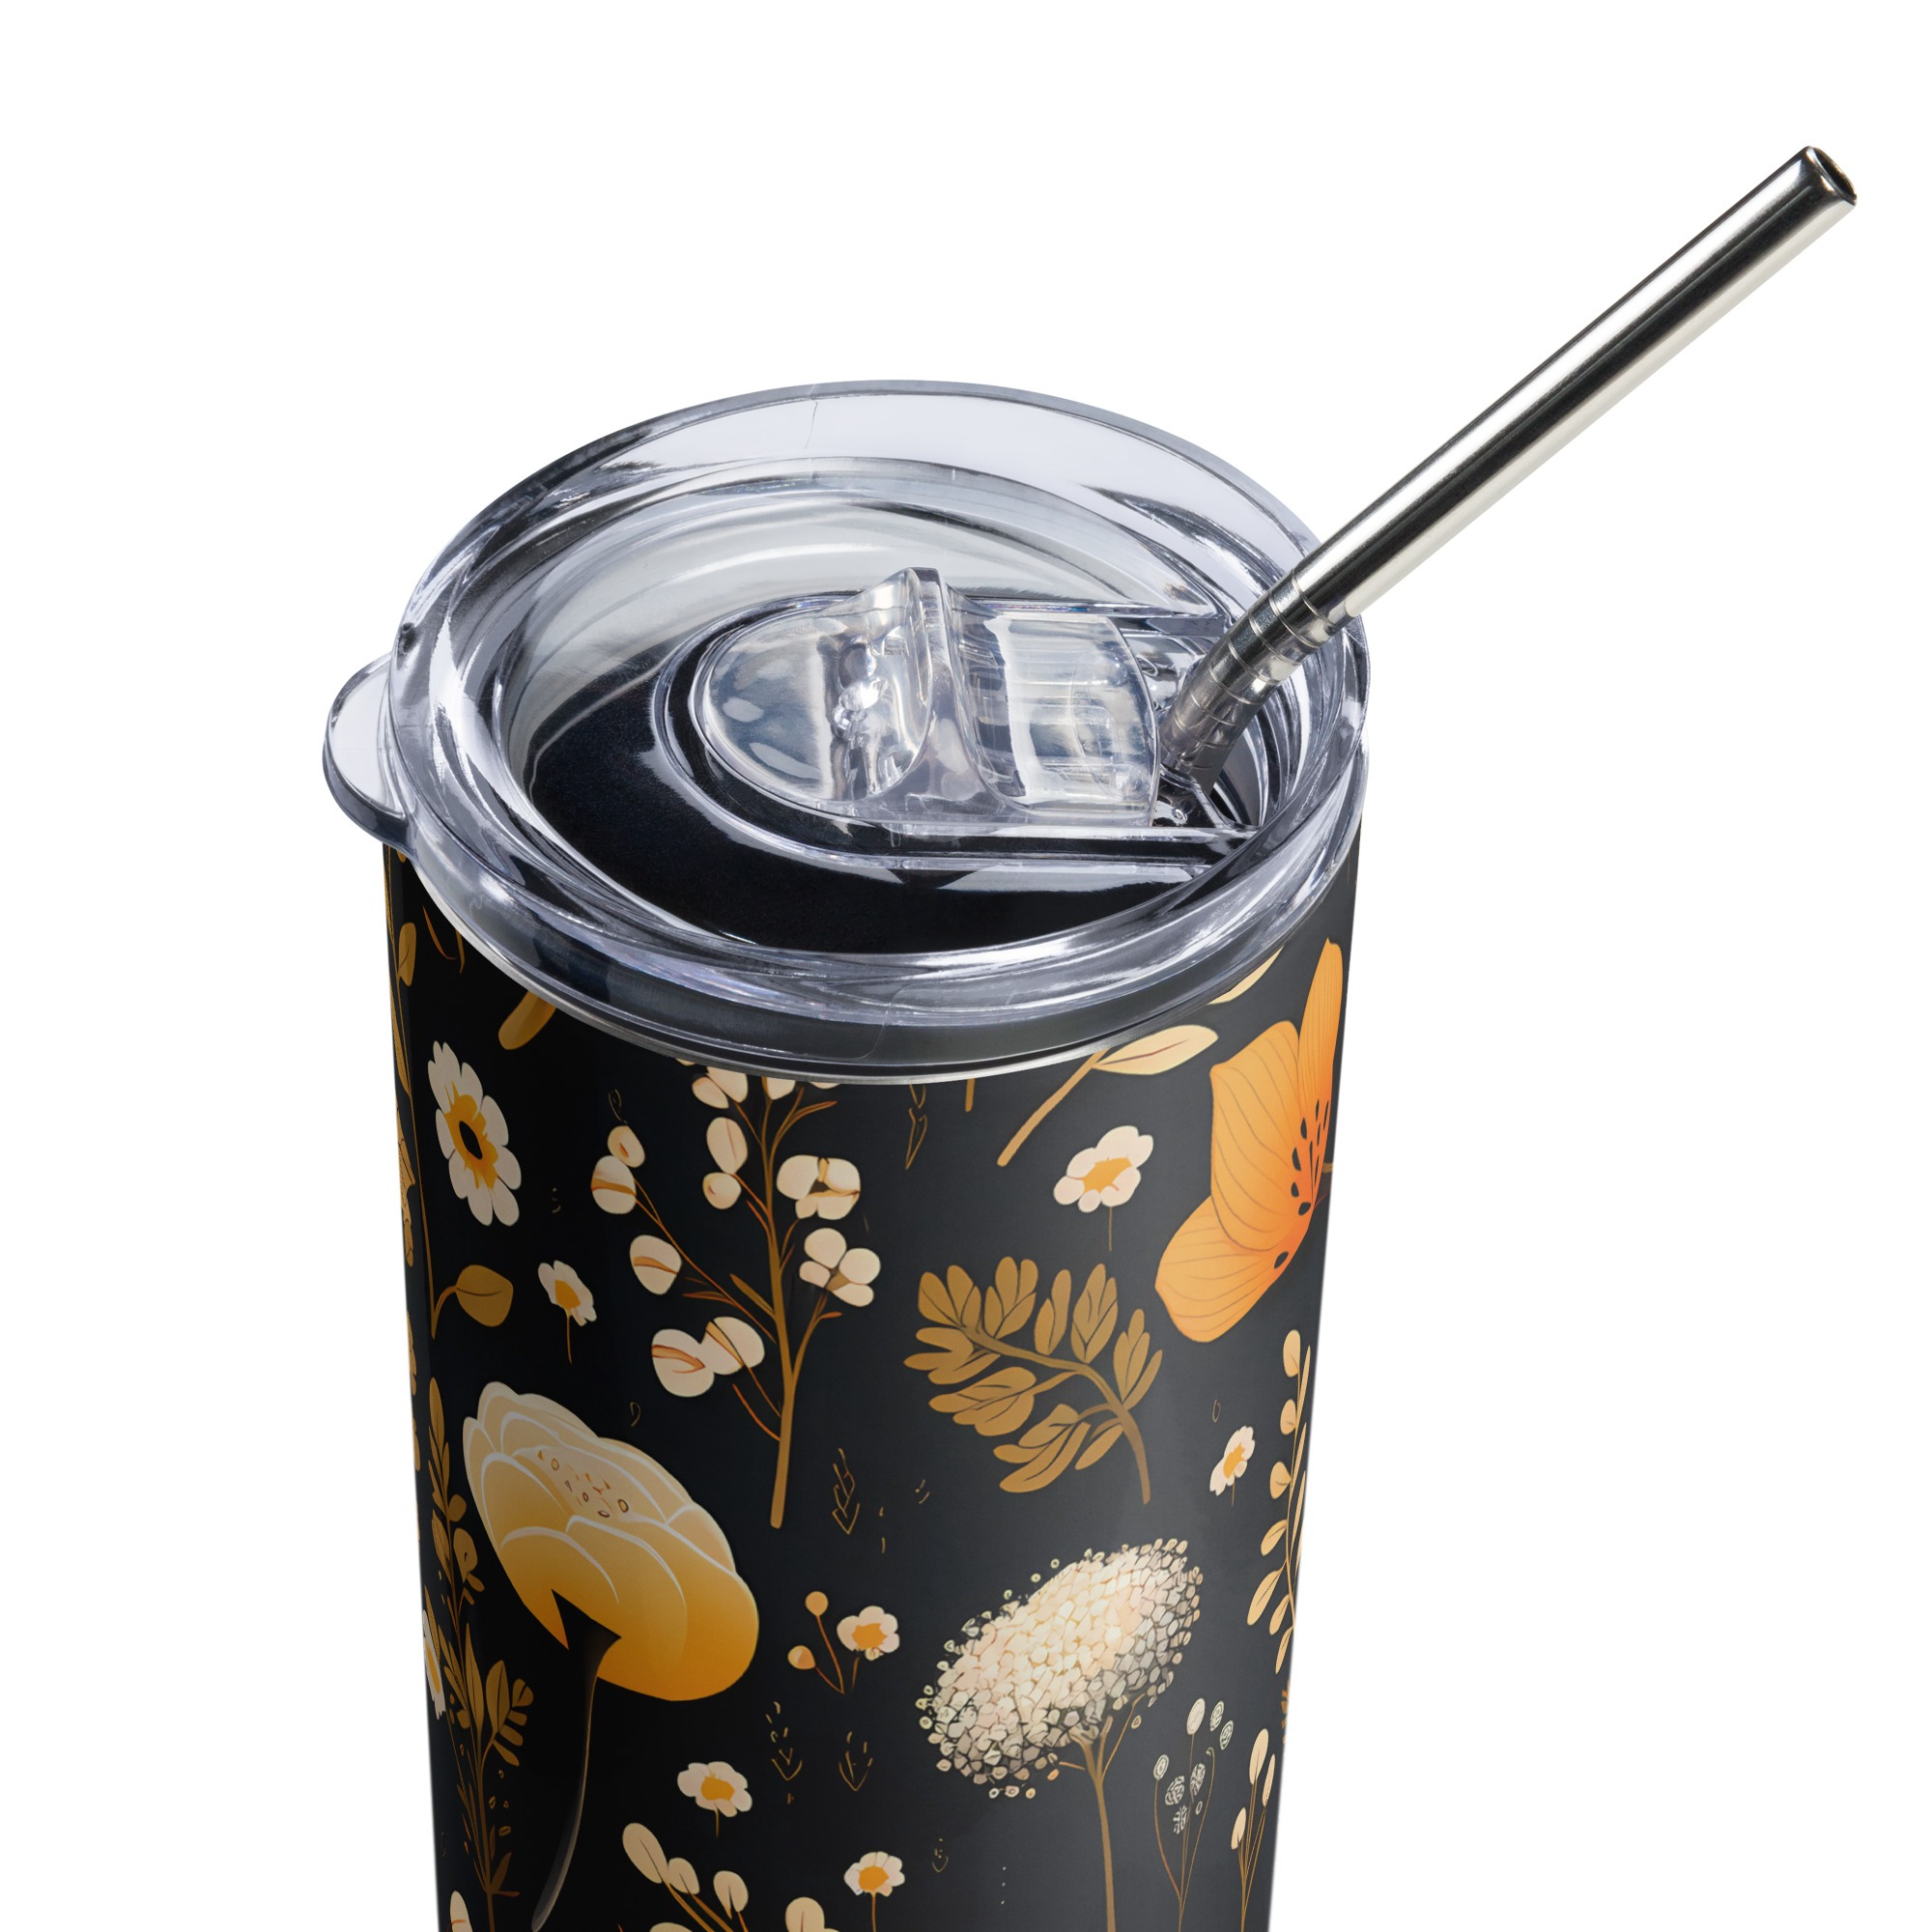 Rustic Floral | Yellow and Black Floral Pattern | Stainless steel tumbler